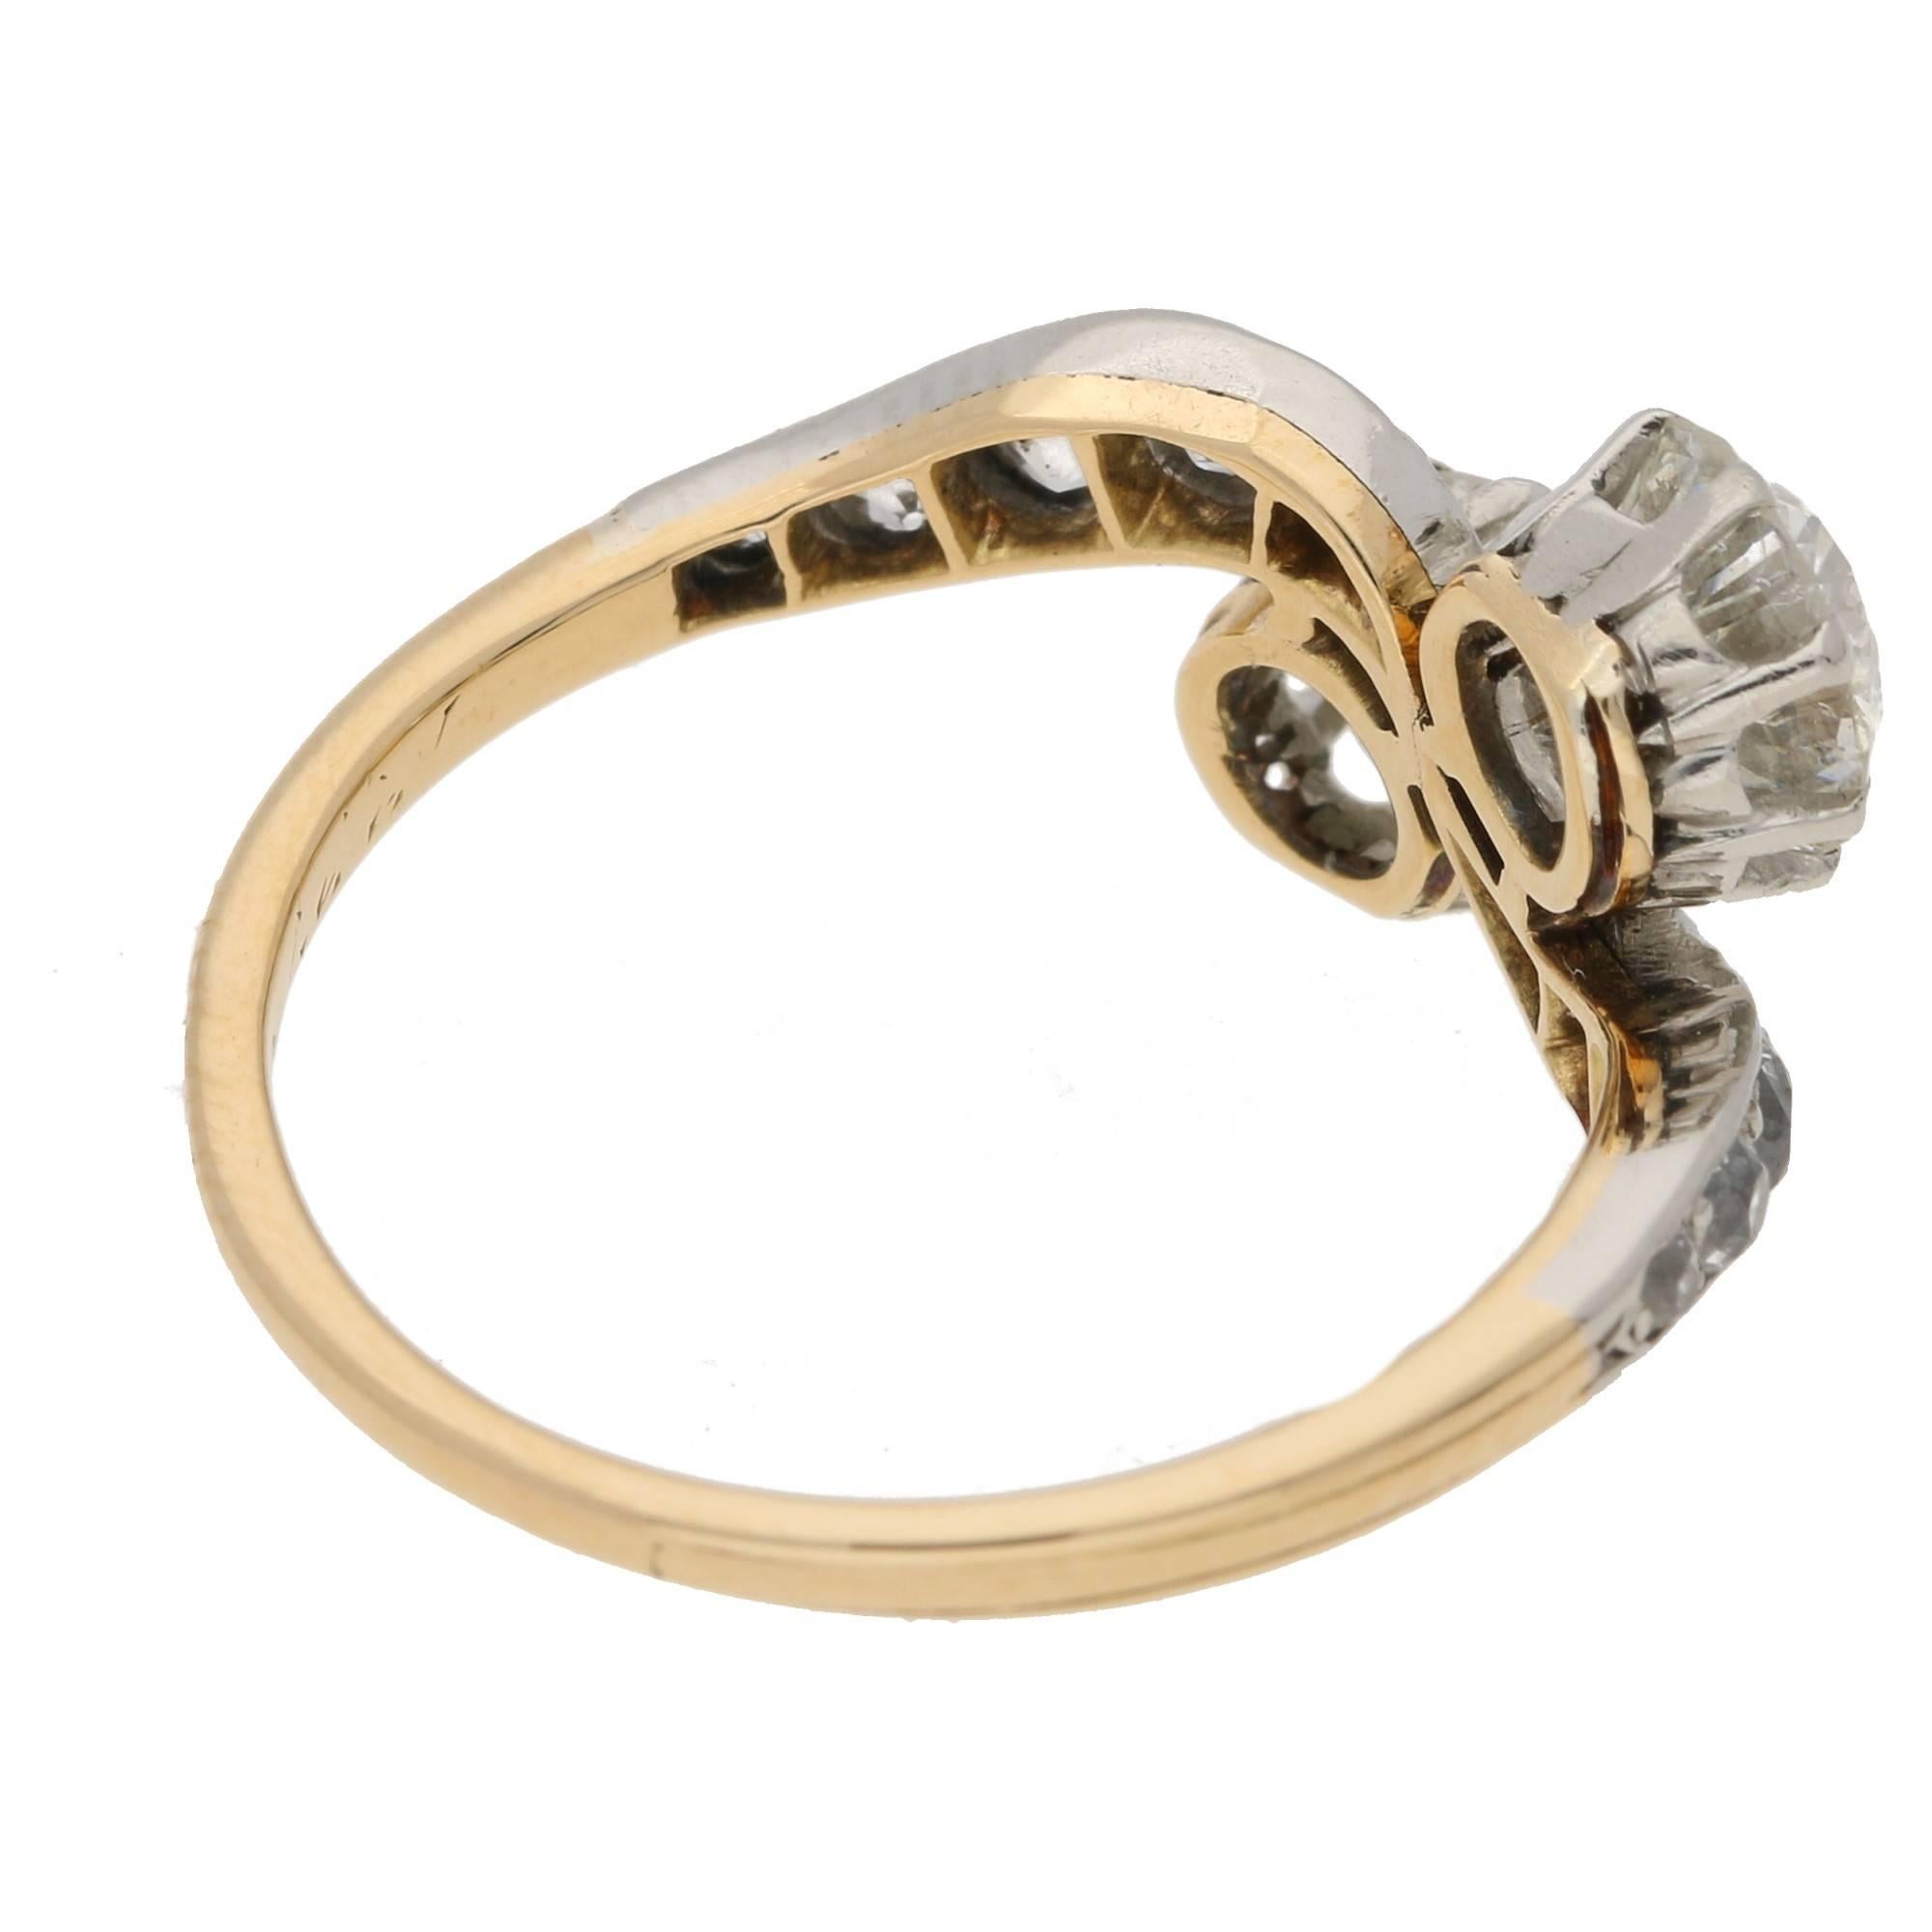 A double diamond twist ring featuring two claw set Old European cut diamonds on a diamond  grain set twist in platinum to an 18ct yellow gold band. The central two diamonds are estimated as H/I colour, Vs clarity and weighing 0.80ct and 0.77ct